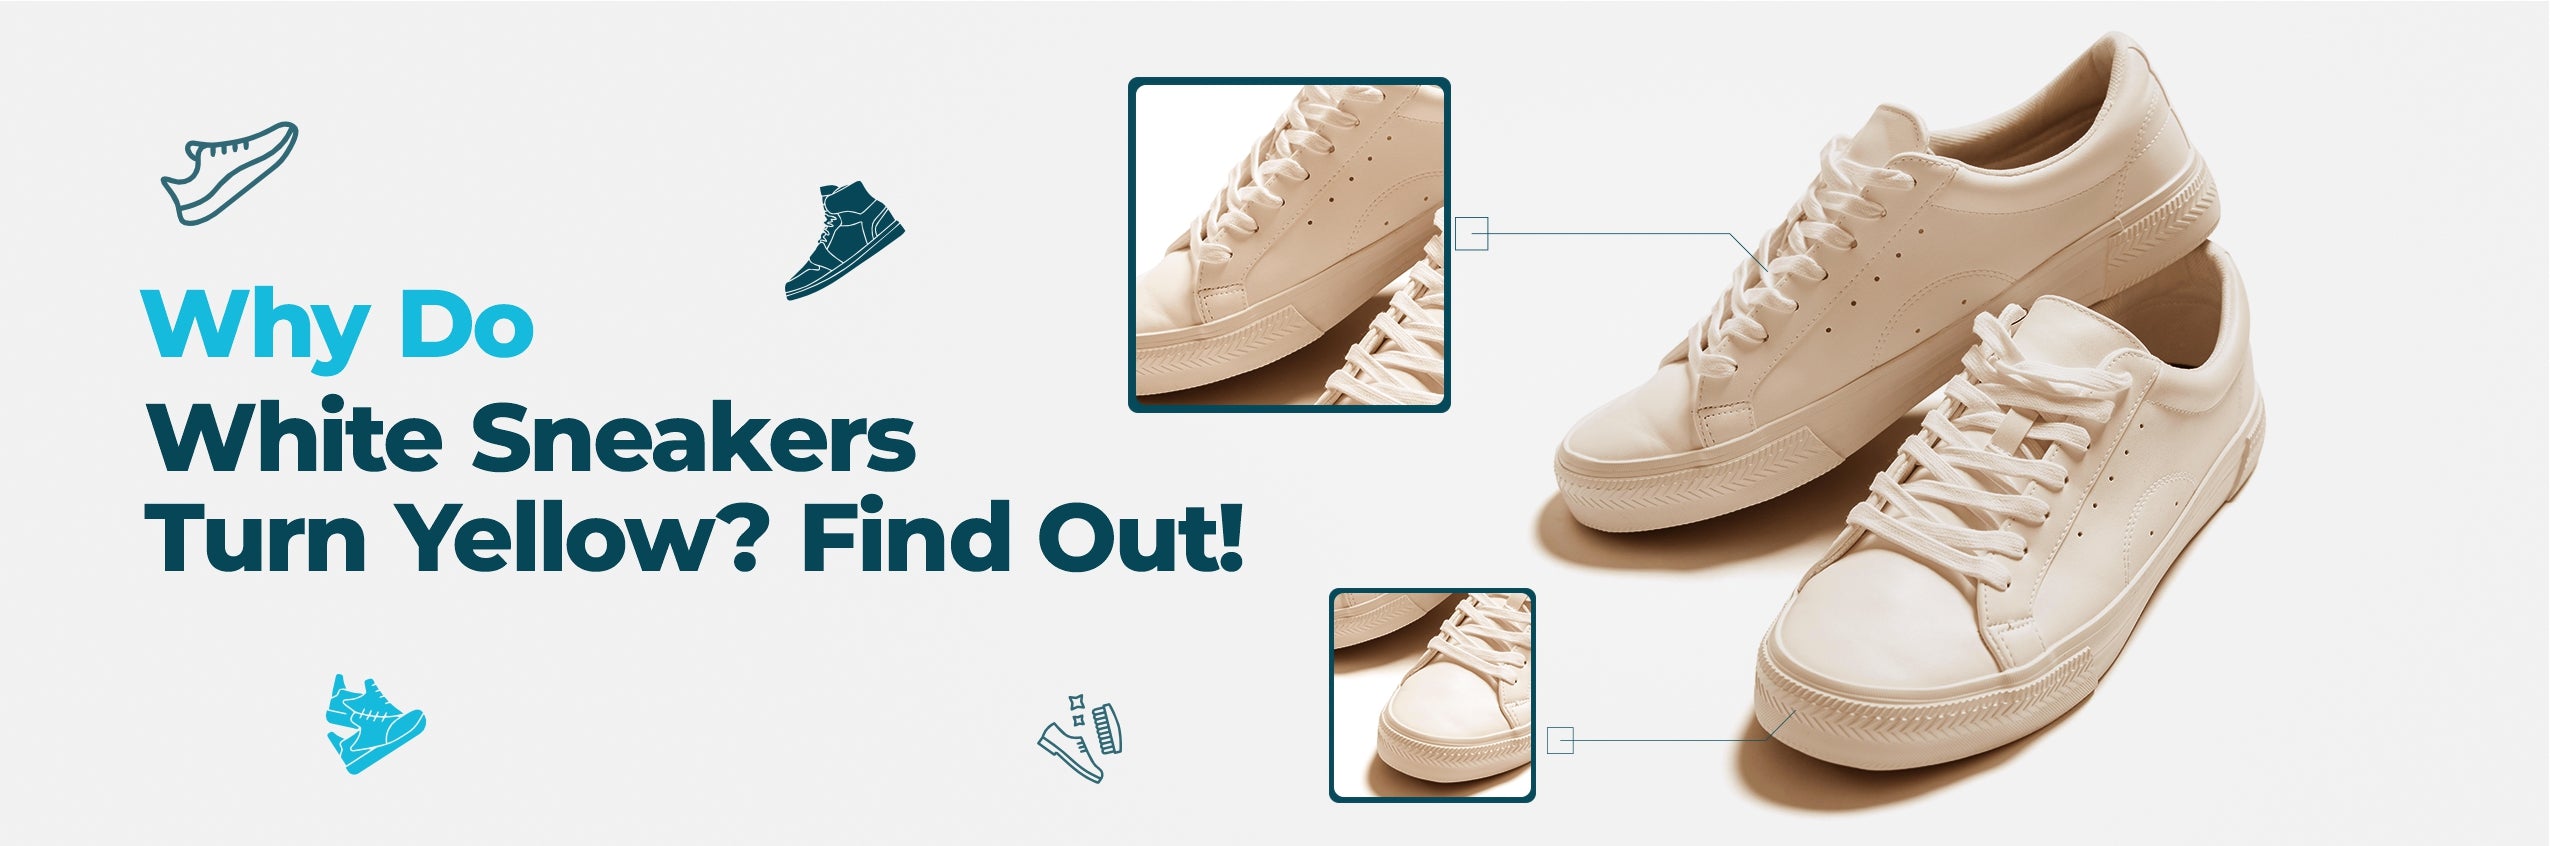 Why Do White Sneakers Turn Yellow Find Out!